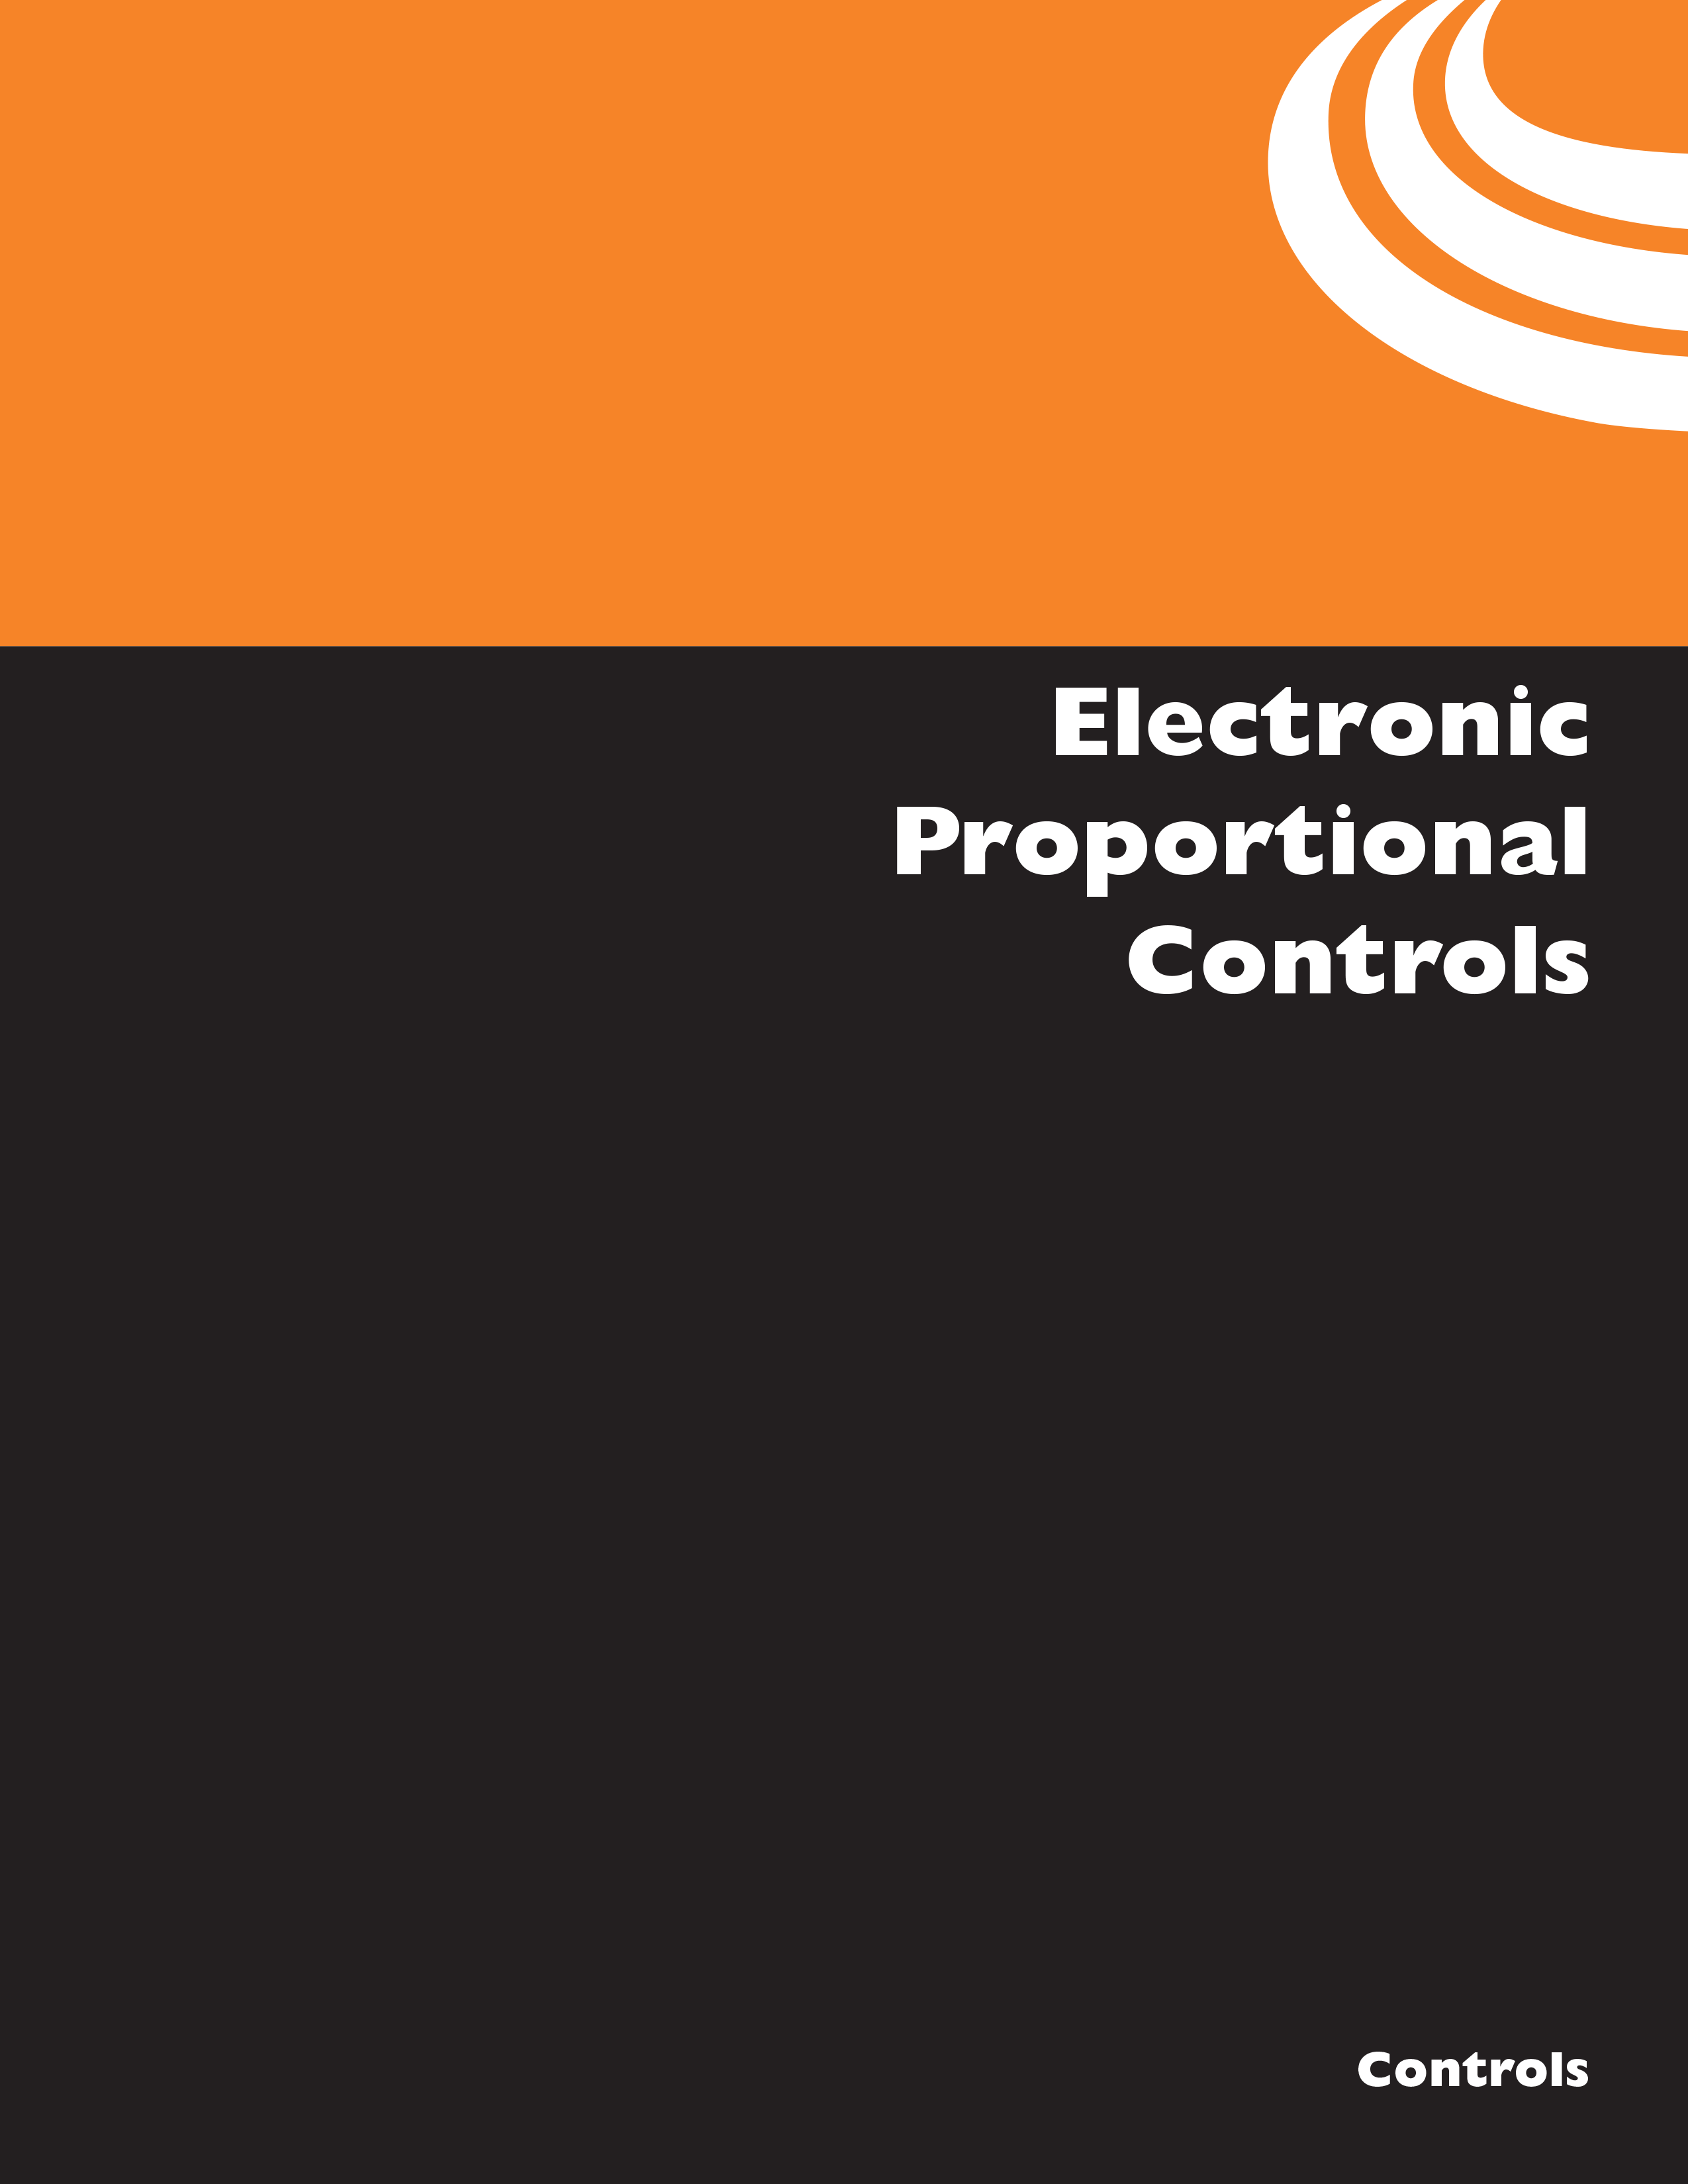 Electronic Proportional Controls